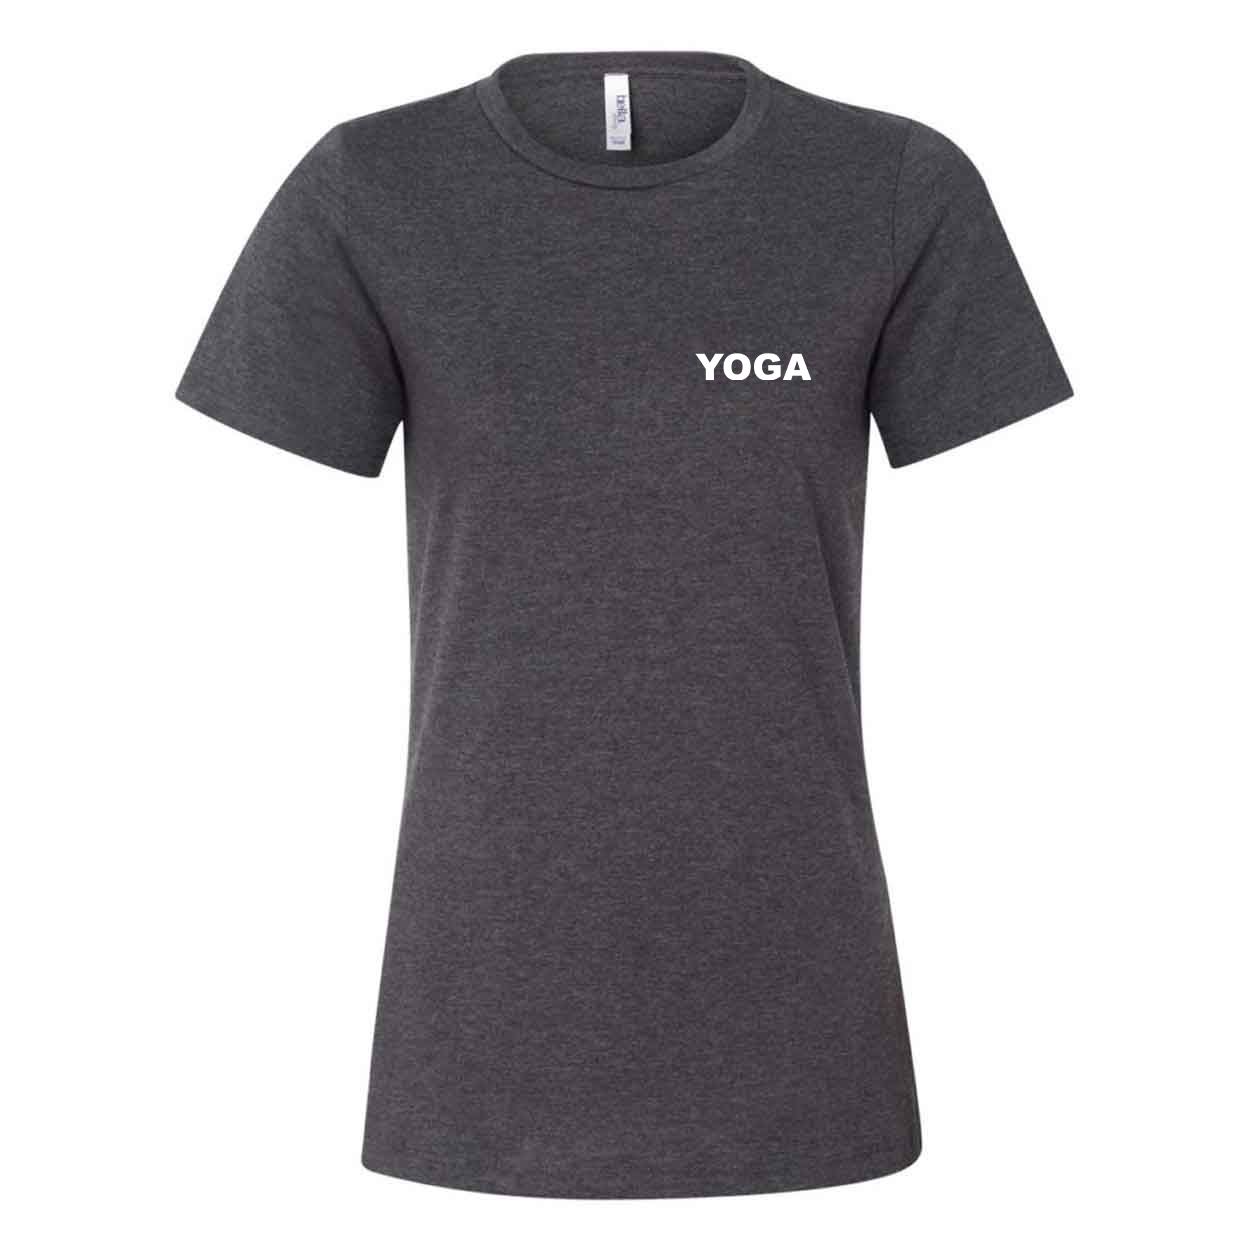 Yoga Brand Logo Women's Night Out Relaxed Jersey T-Shirt Dark Gray Heather